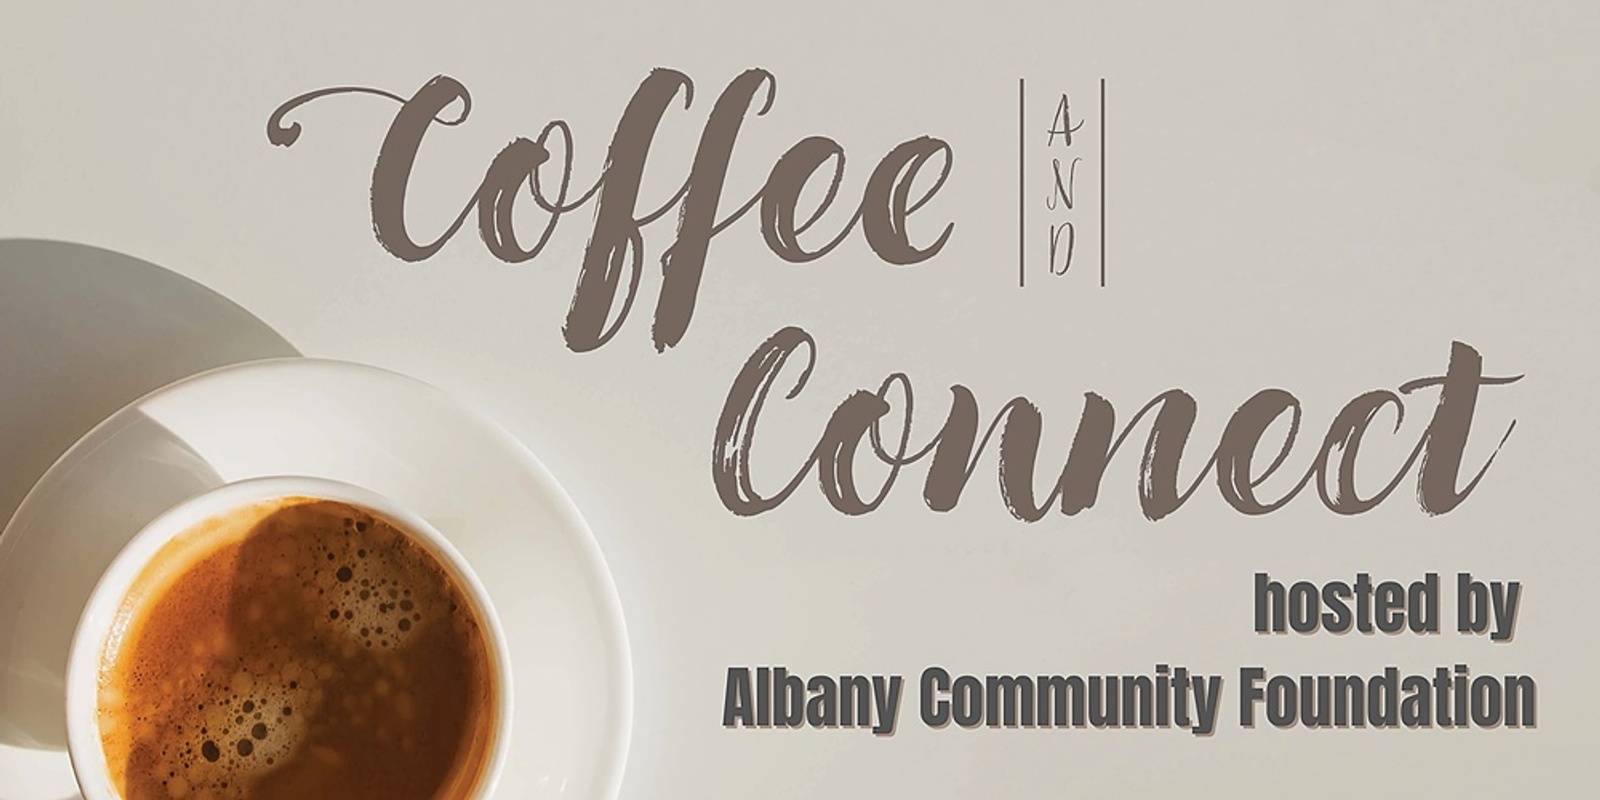 Coffee and Connect with Albany Community Foundation